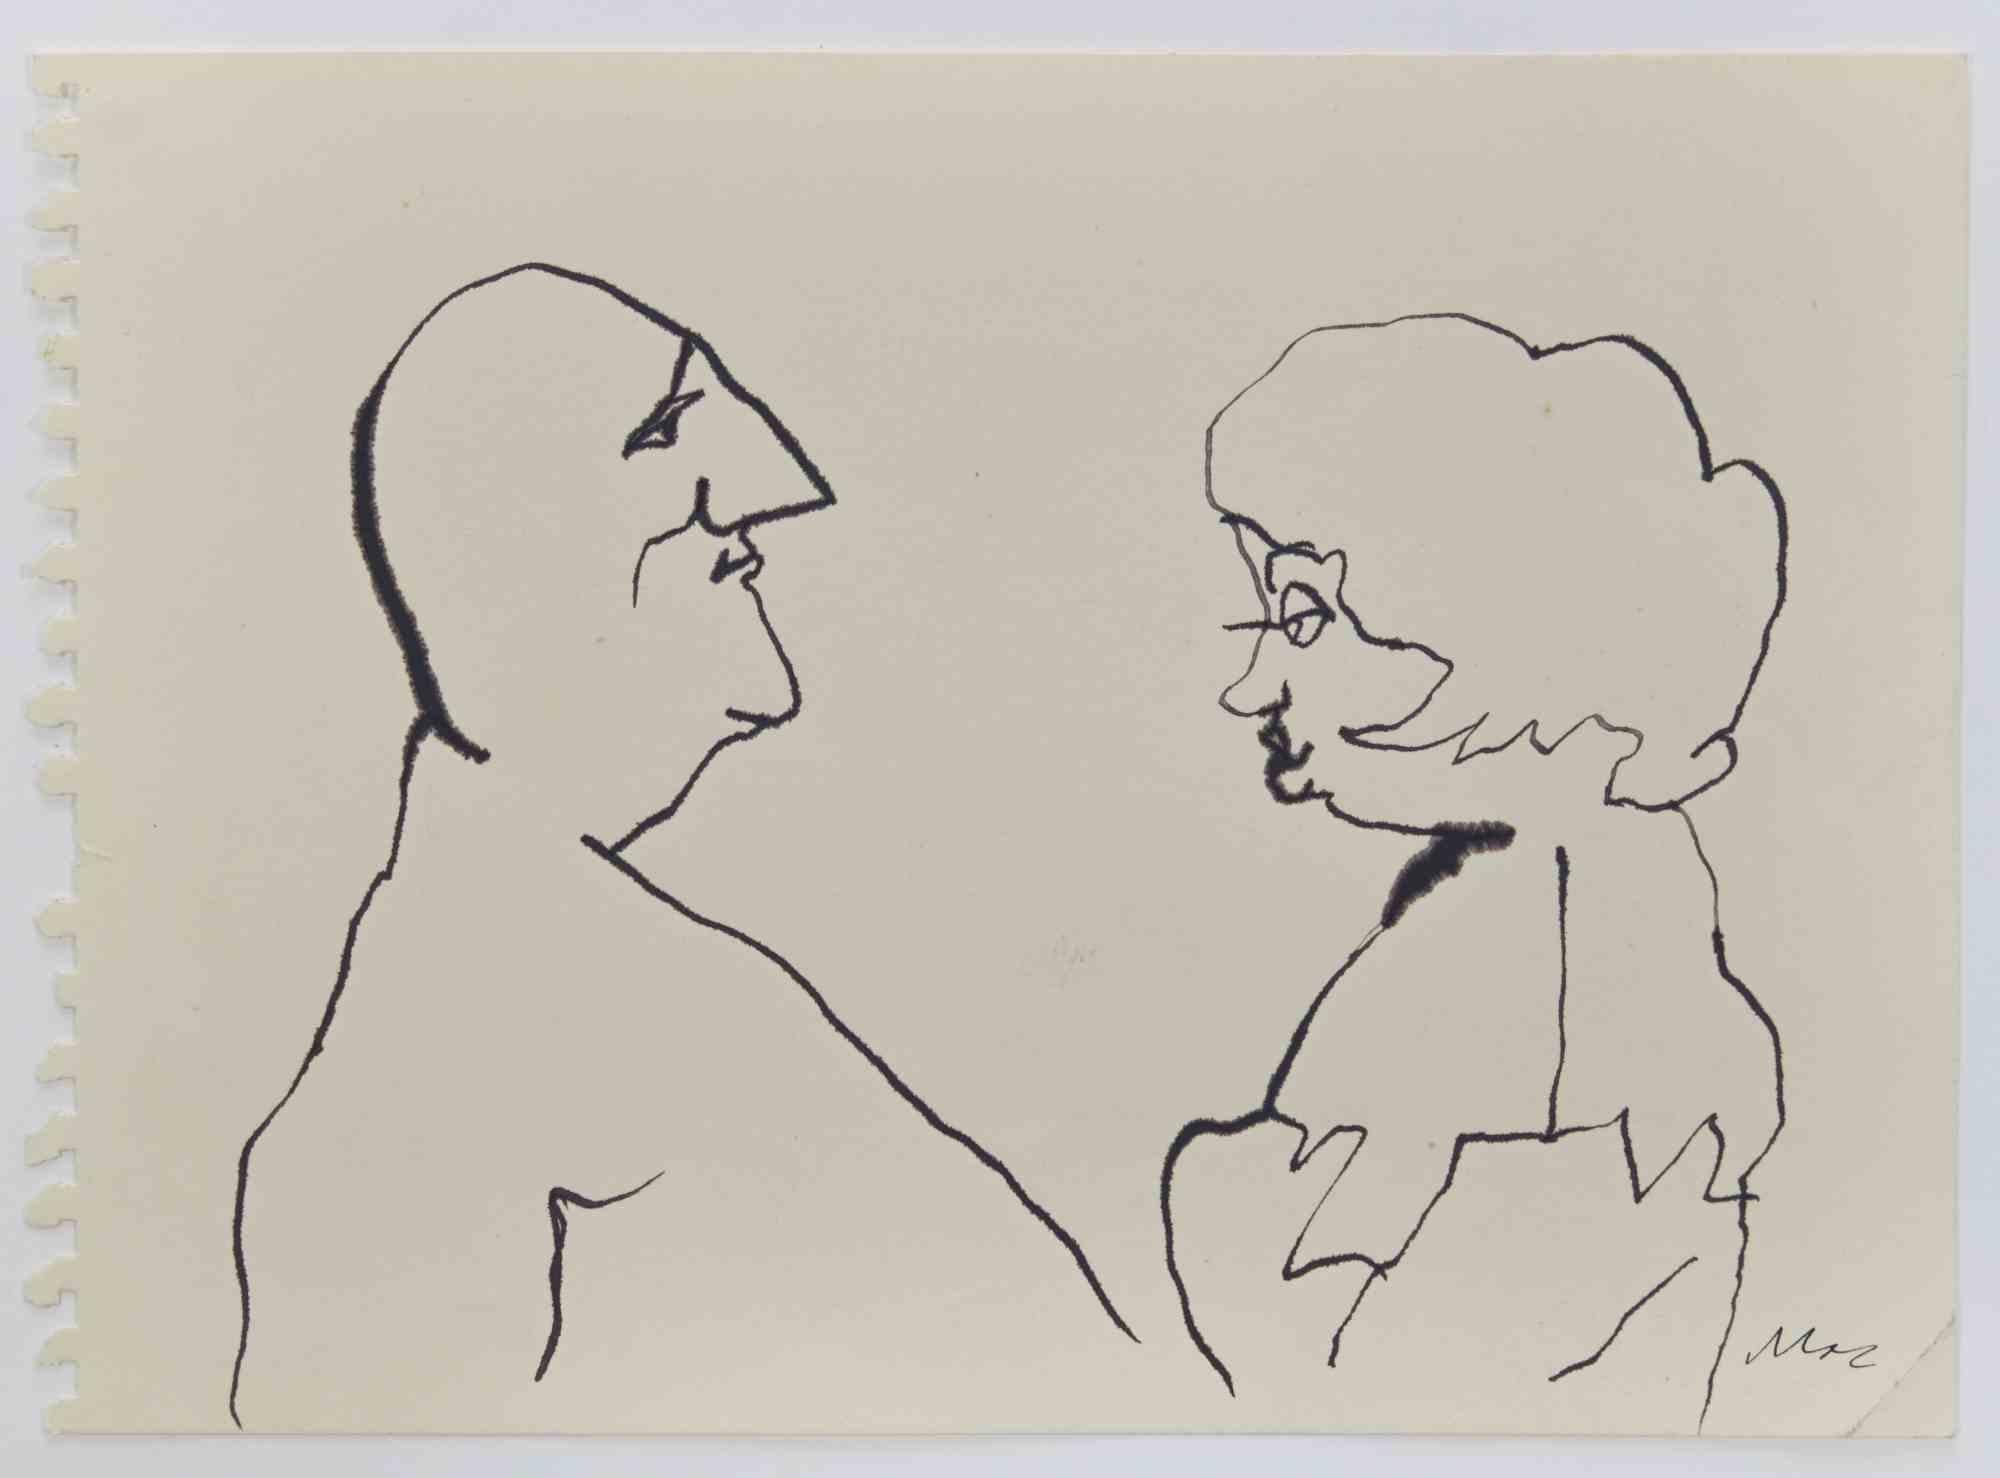 The Couple is a China Ink Drawing realized by Mino Maccari  (1924-1989) in the 1960s.

Monogrammed on the lower.

Good condition.

Mino Maccari (Siena, 1924-Rome, June 16, 1989) was an Italian writer, painter, engraver and journalist, winner of the